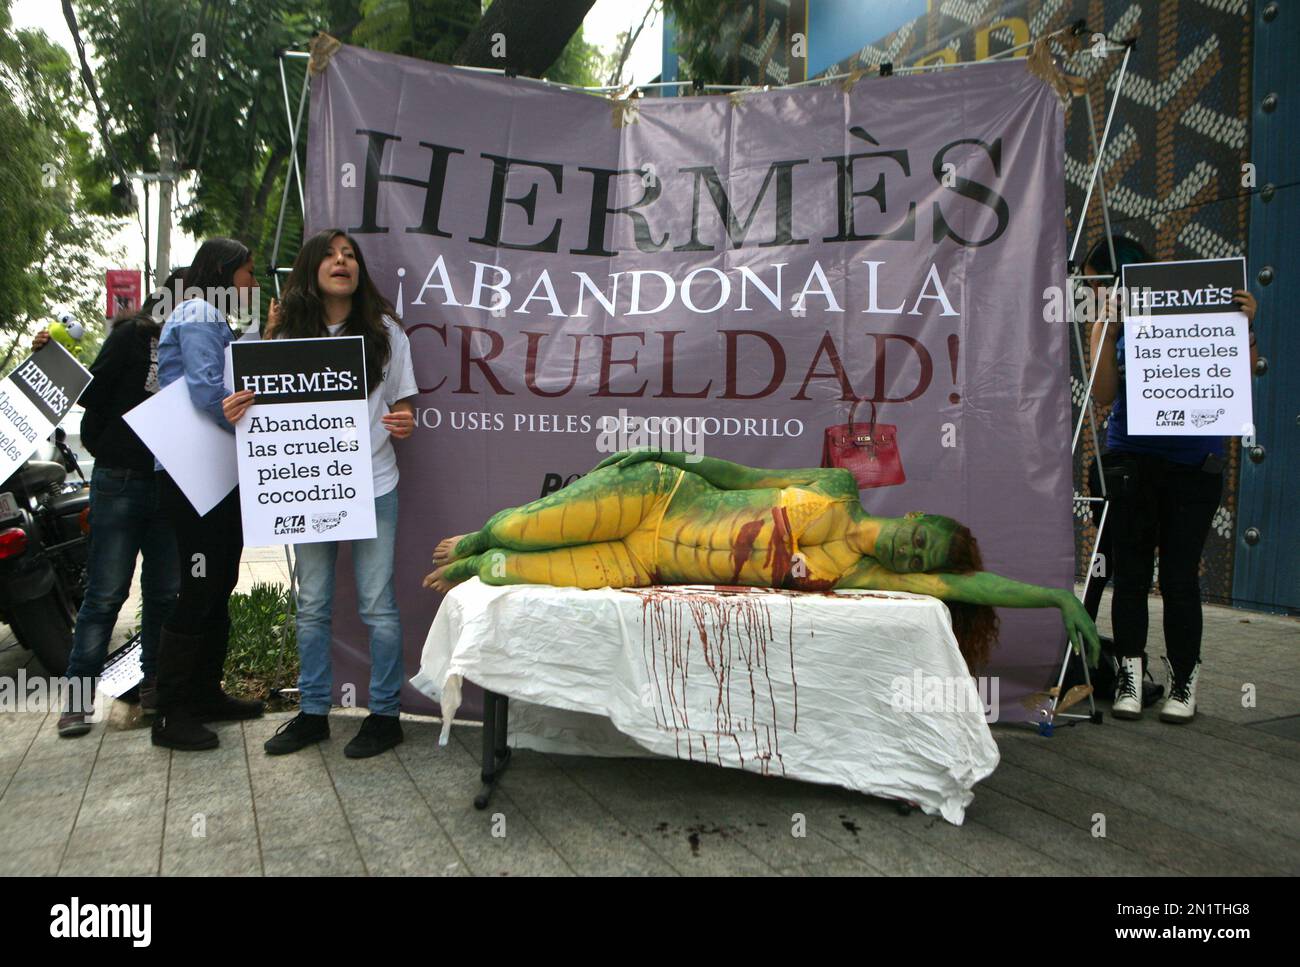 Elena Larea plays the part of a dead crocodile during a protest against animal  cruelty outside a luxury Hermes store in Mexico City, Wednesday, Aug. 5,  2015. The sign behind reads in